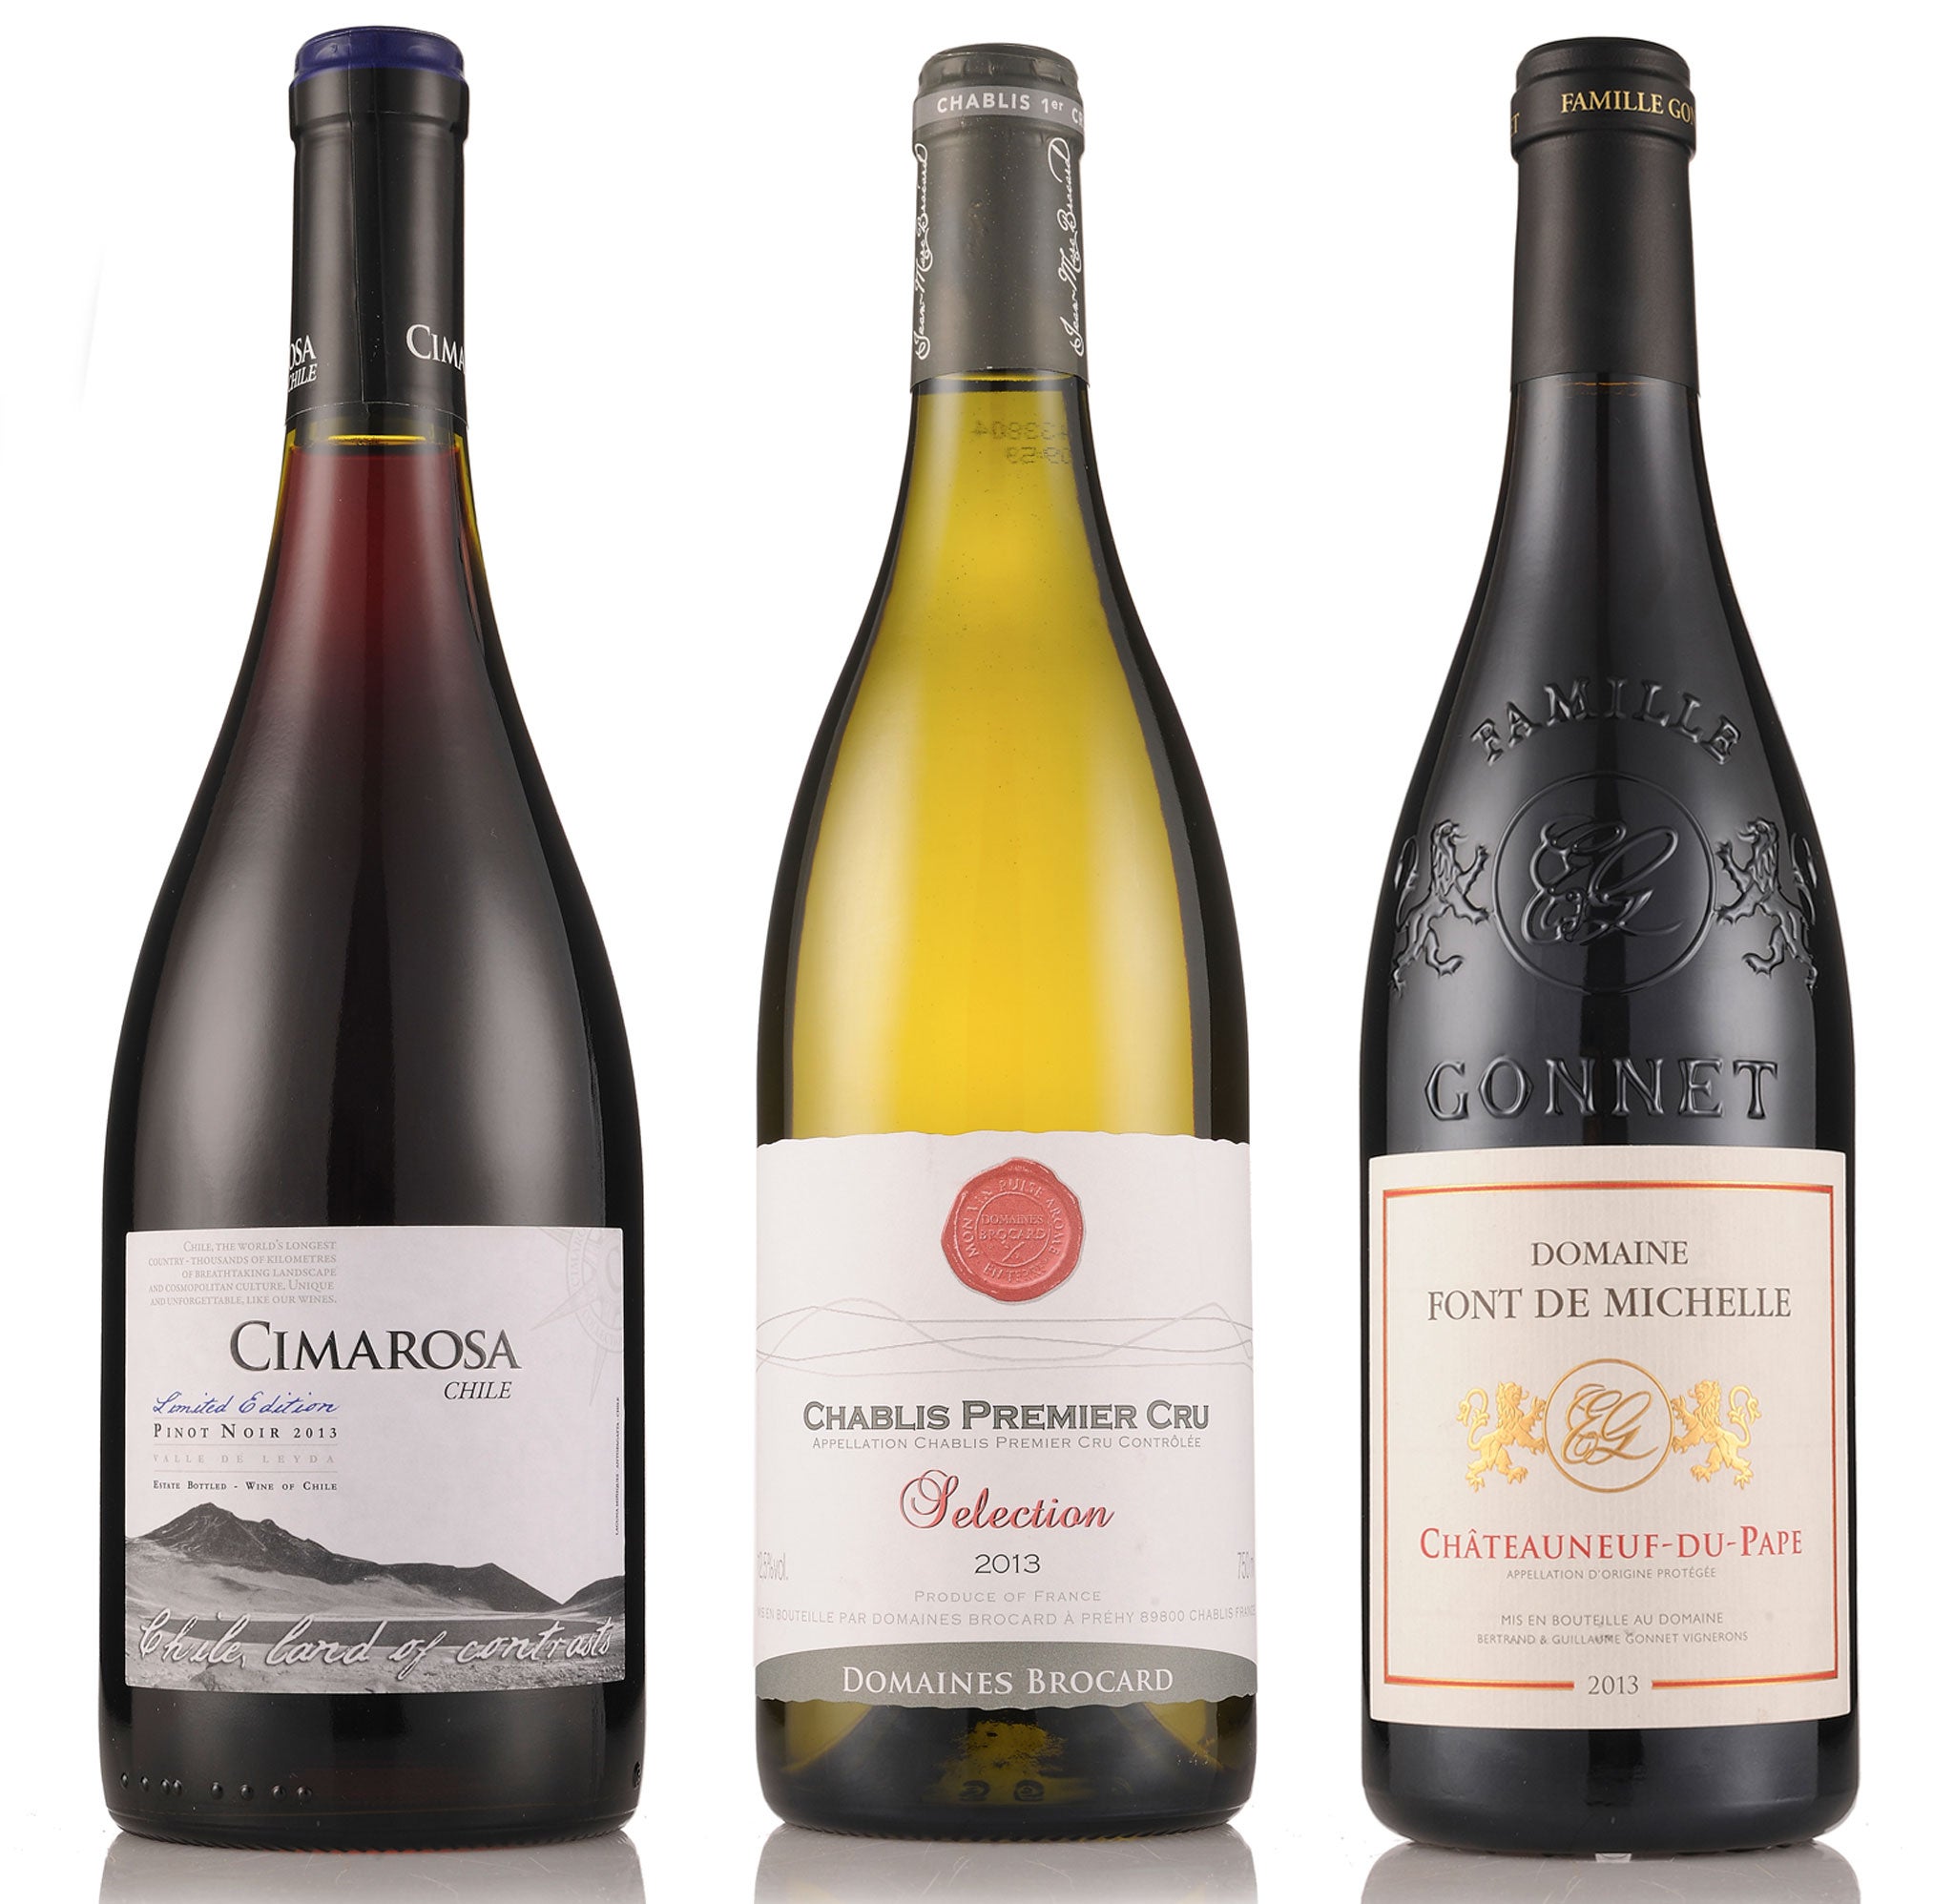 Wine 13 Pinot Noir Limited Edition Leyda Valley 14 Taste The Difference Chablis Premier Cru Brocard 13 Font De Michelle Chateauneuf Du Pape The Independent The Independent